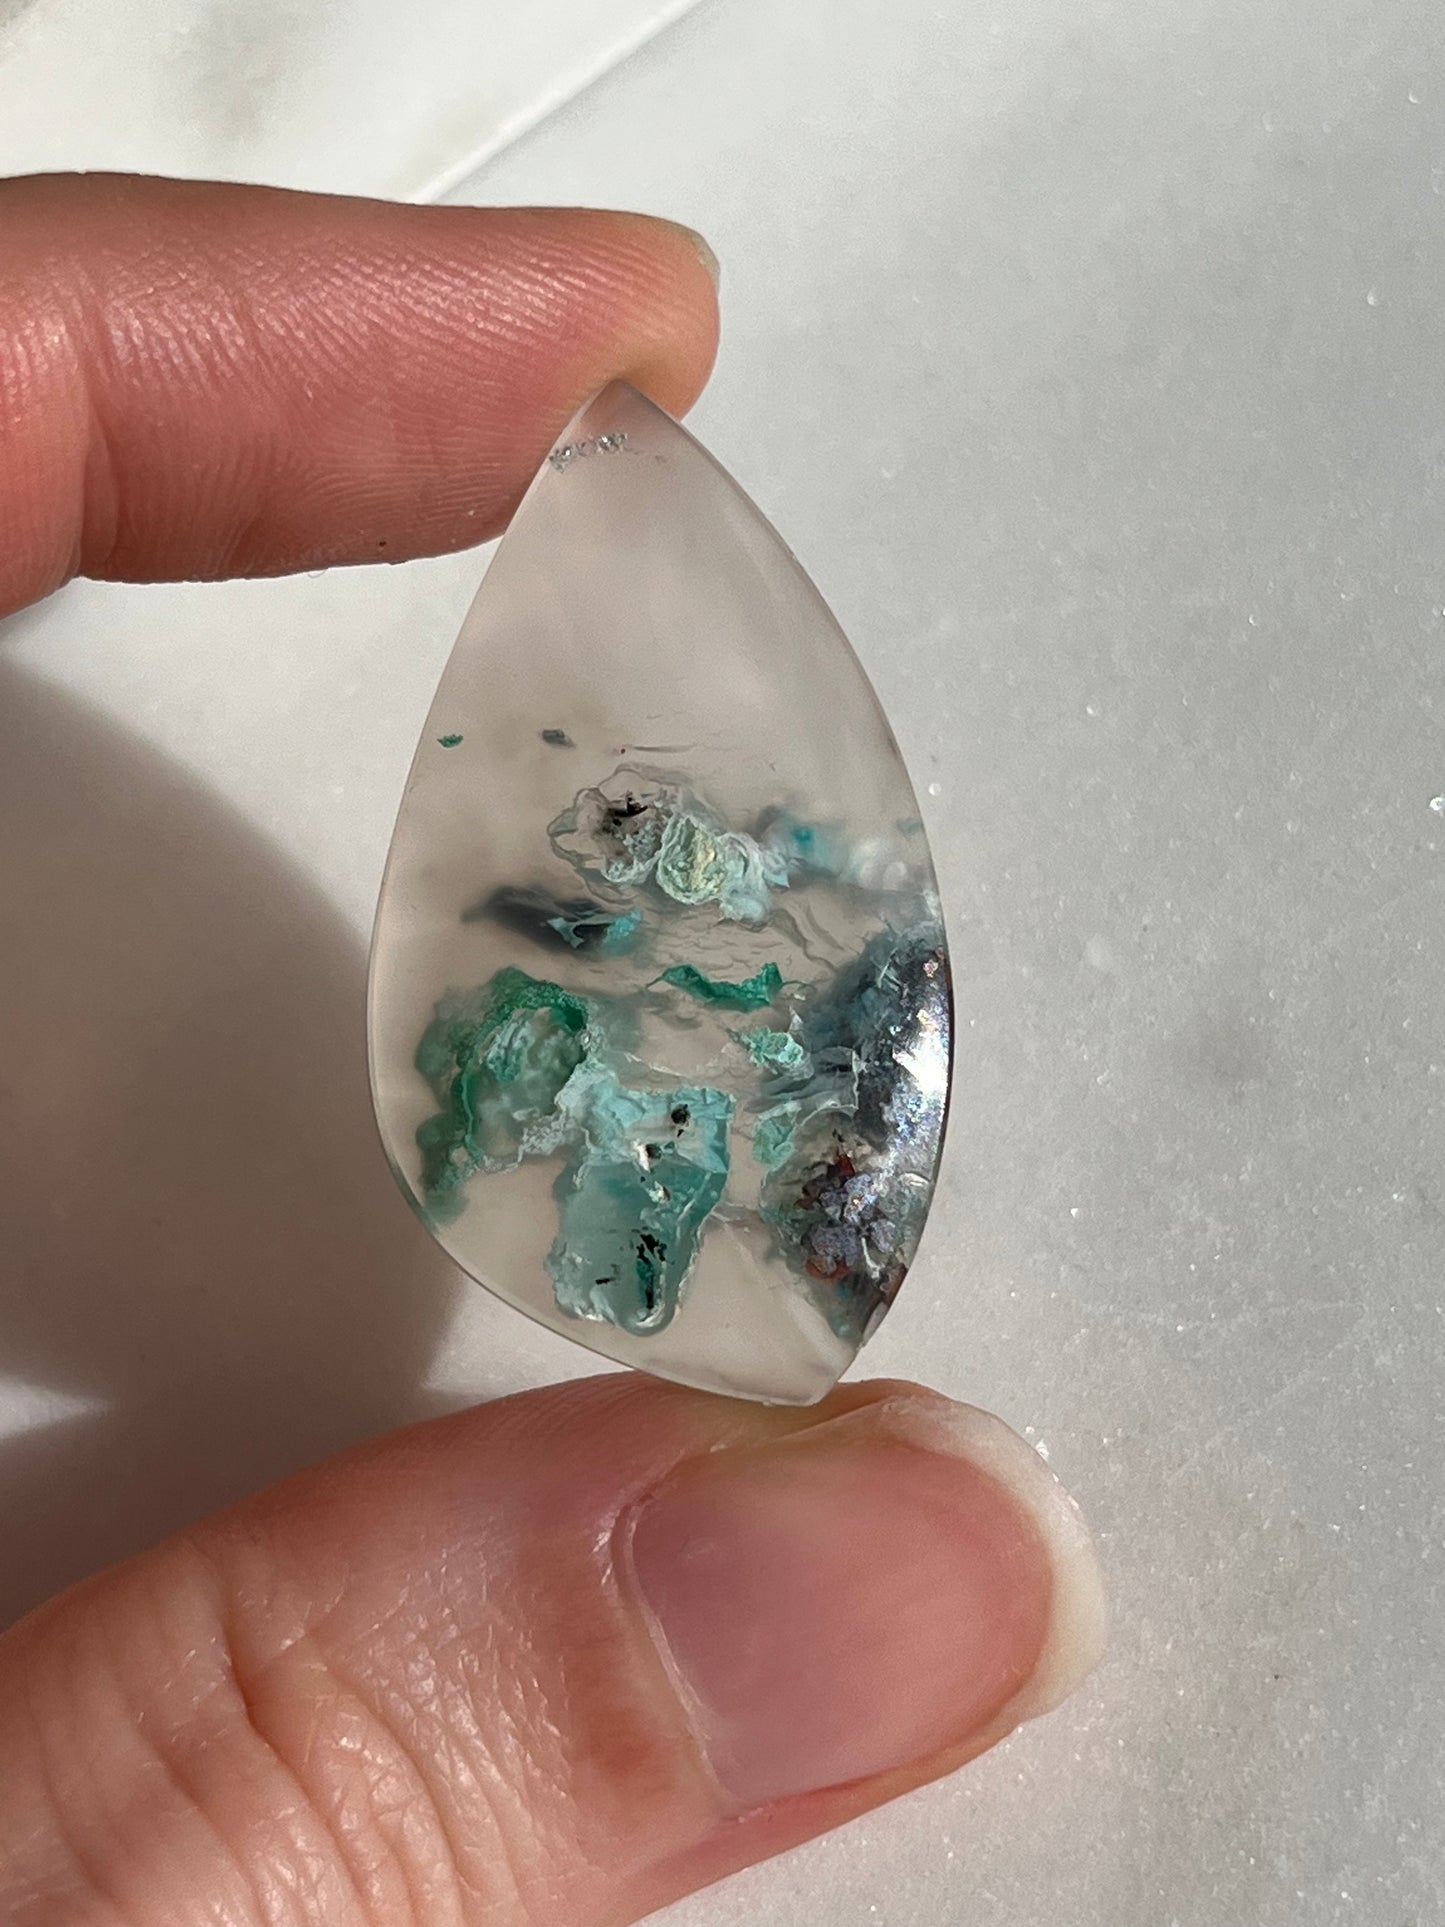 Native Copper & Chrysocolla in Chalcedony Teardrop Cabochon (You Choose)